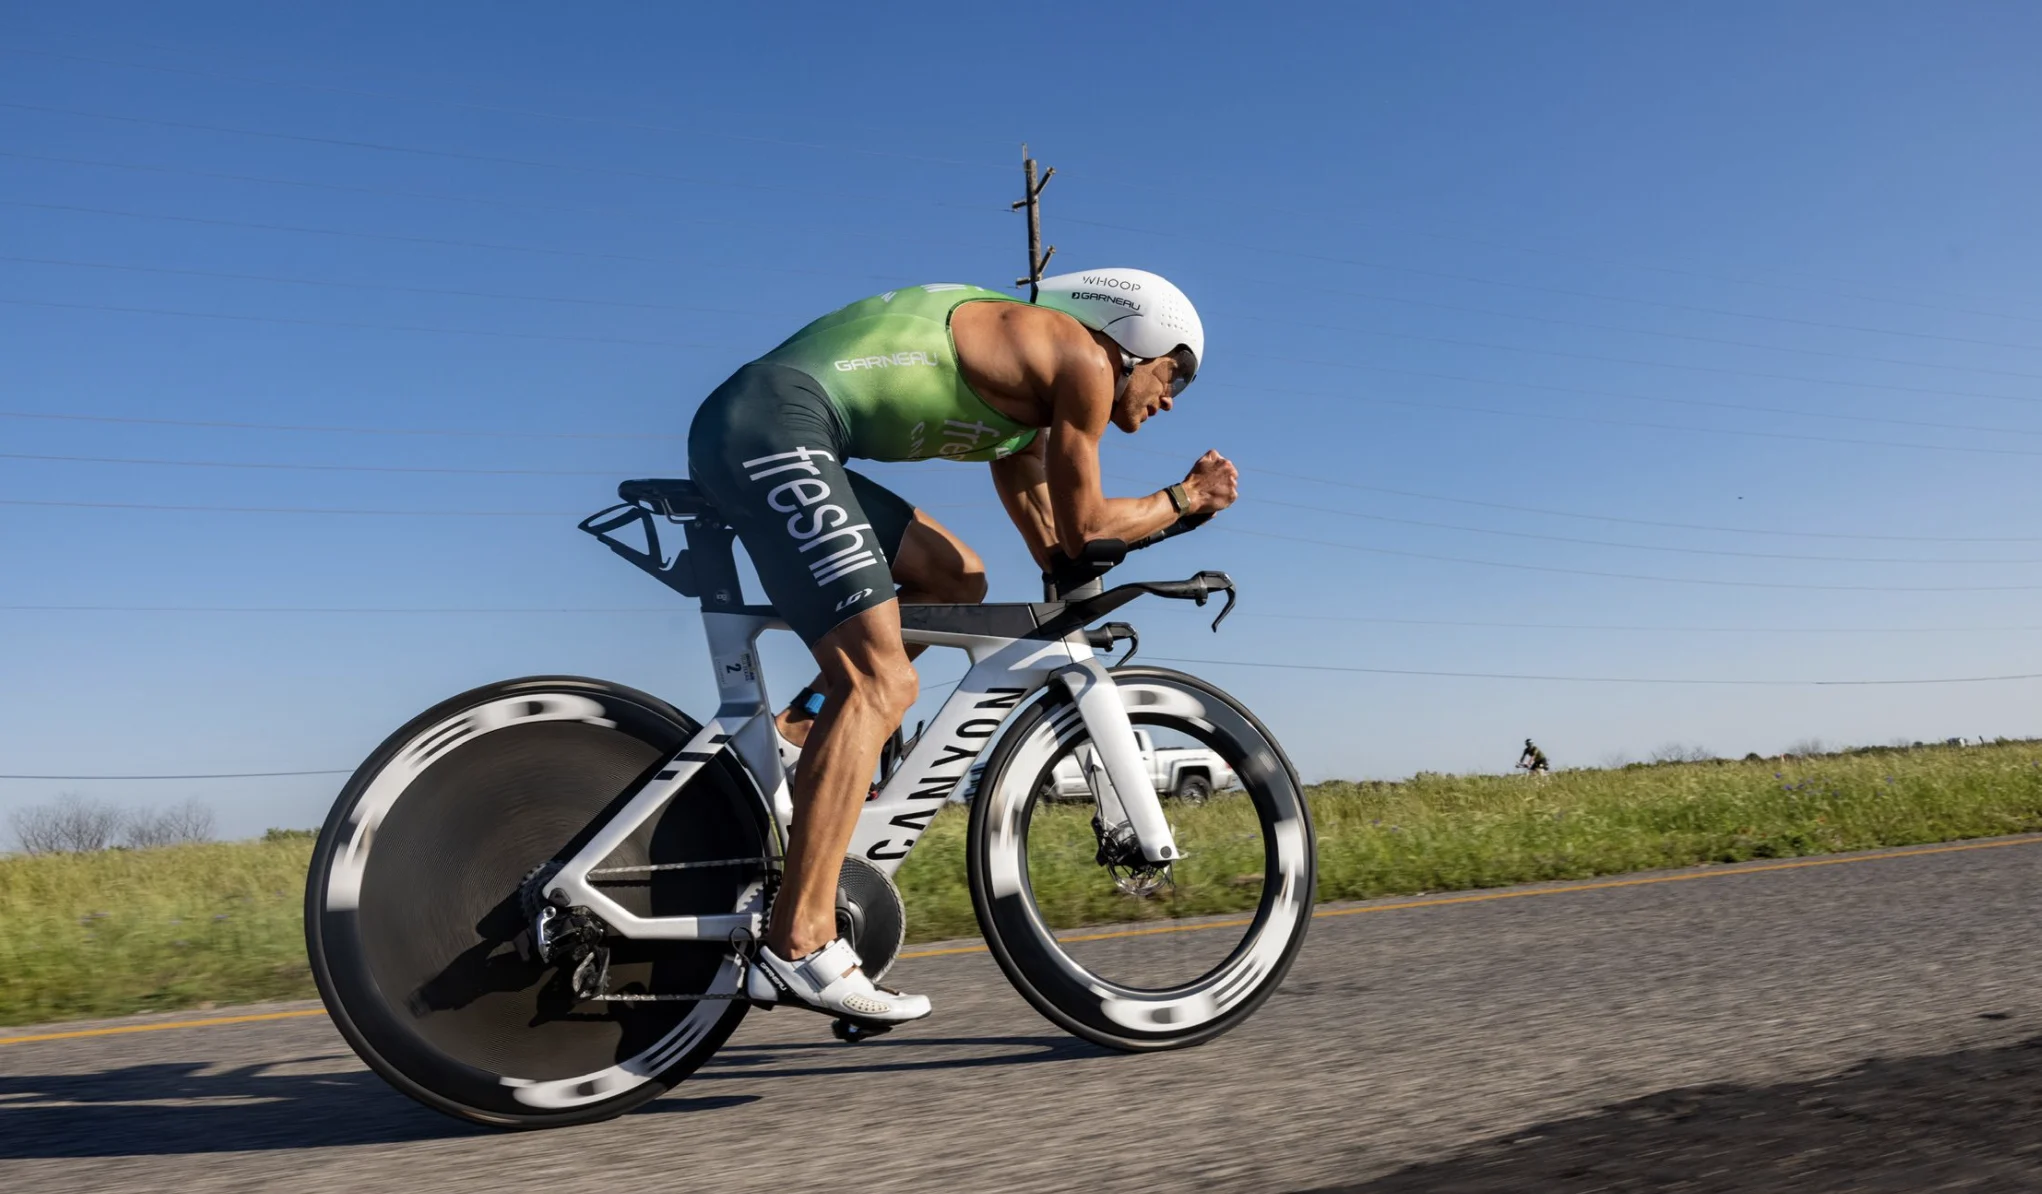 Lionel Sanders’ Heart Rate, Strain, Sleep &#038; Recovery Data from Ironman 70.3 Victory